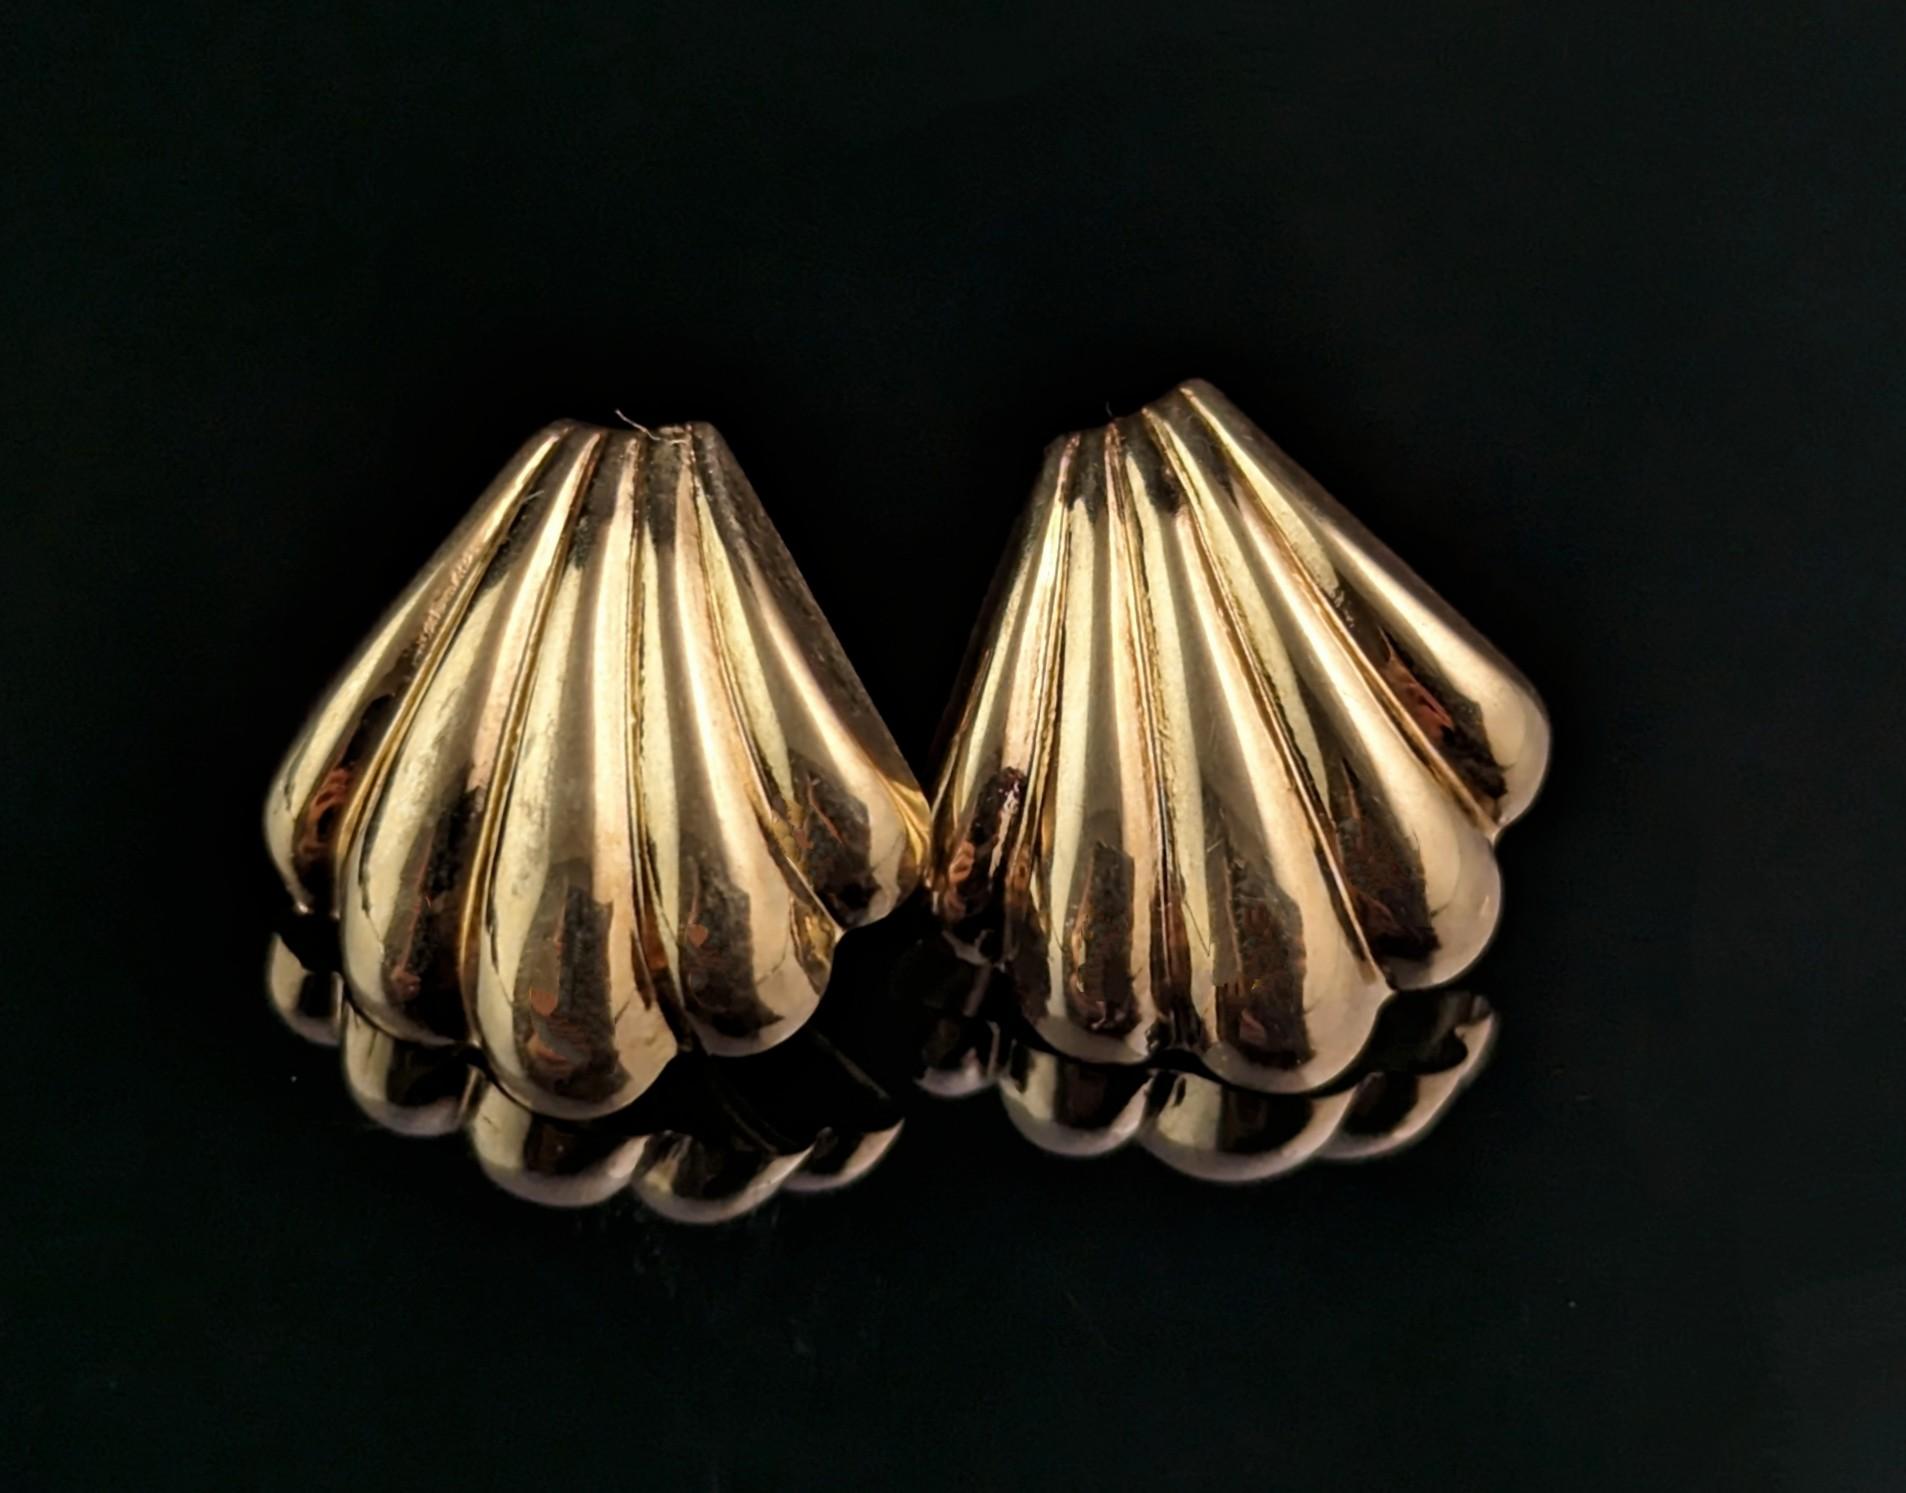 A gorgeous pair of vintage 9ct gold shell stud earrings.

Lightweight and easy to wear these pretty shell shaped studs will add a touch of warm beachy vibes to your look.

They are made from 9ct yellow gold and the are post fittings with butterfly